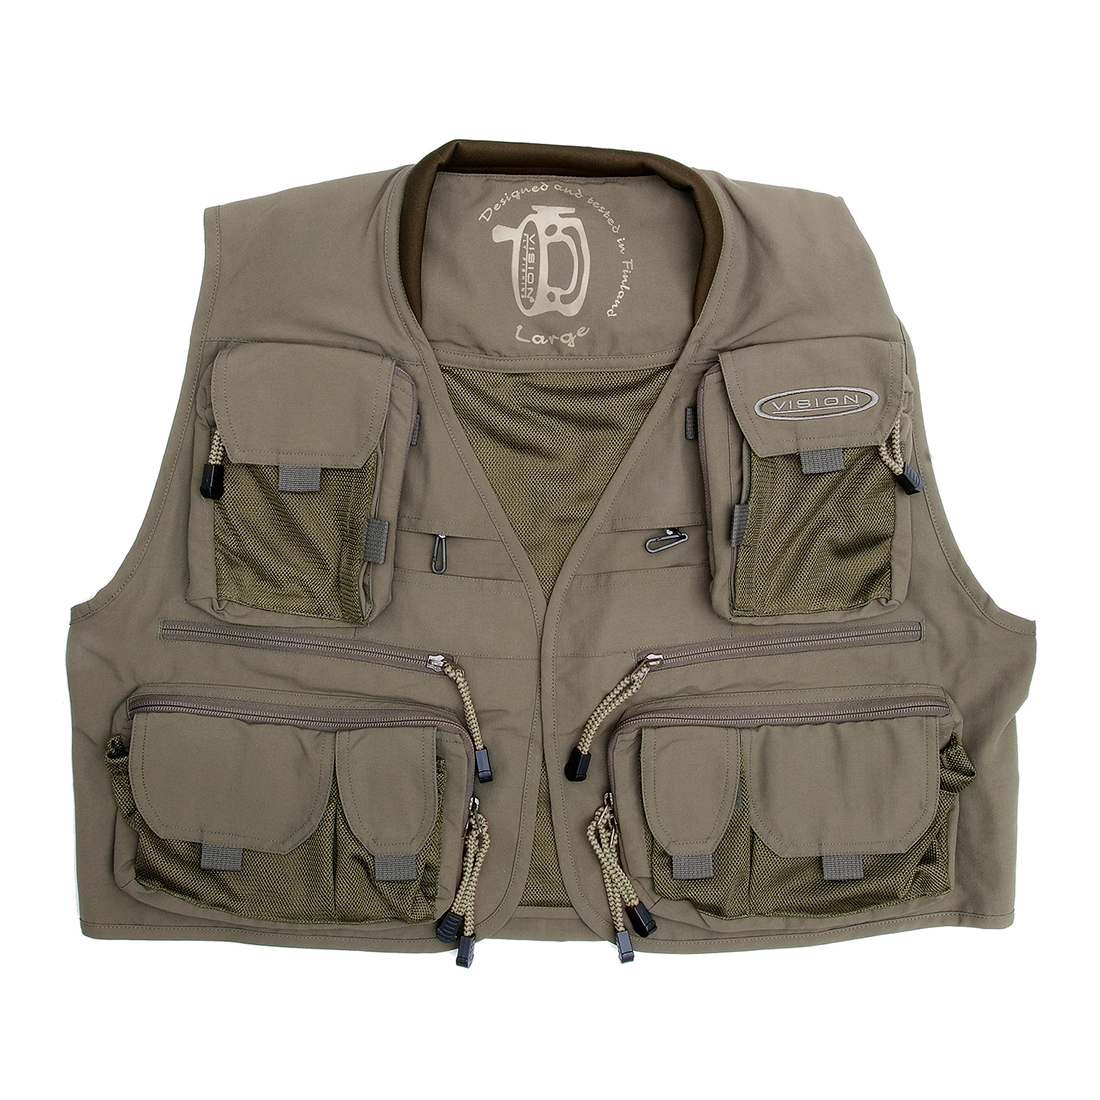 Vision Caribou Fly Fishing Vest in Light Green 